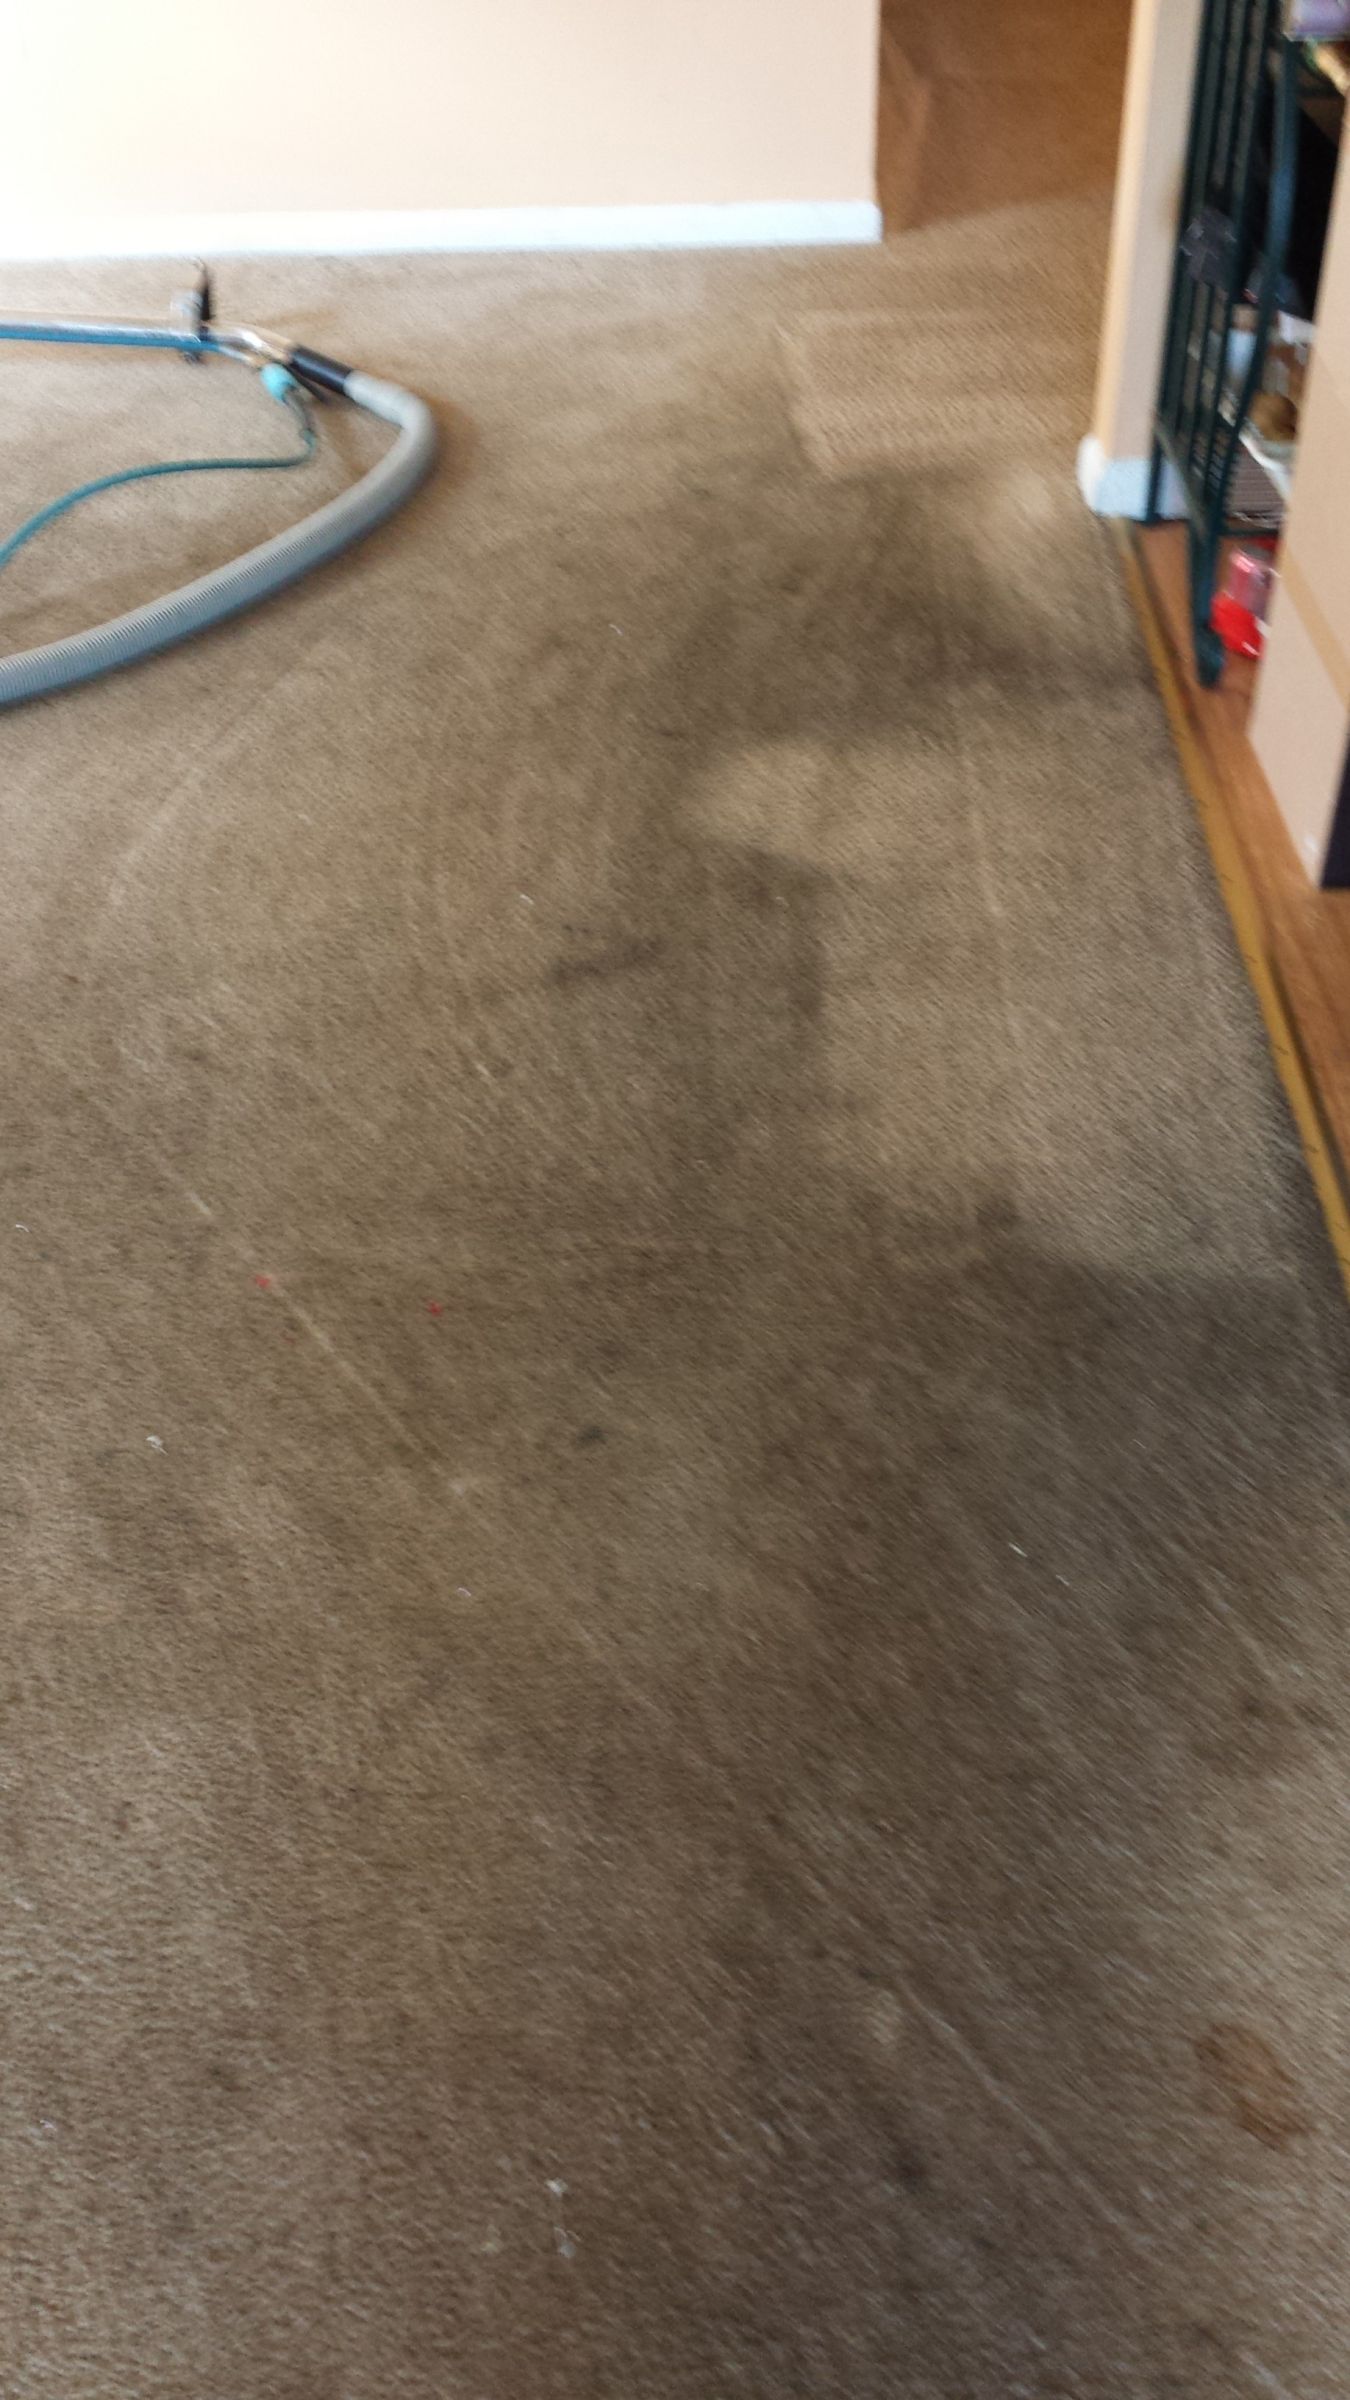 Carpets Causing Allergies. Haddonfield Carpet Cleaning